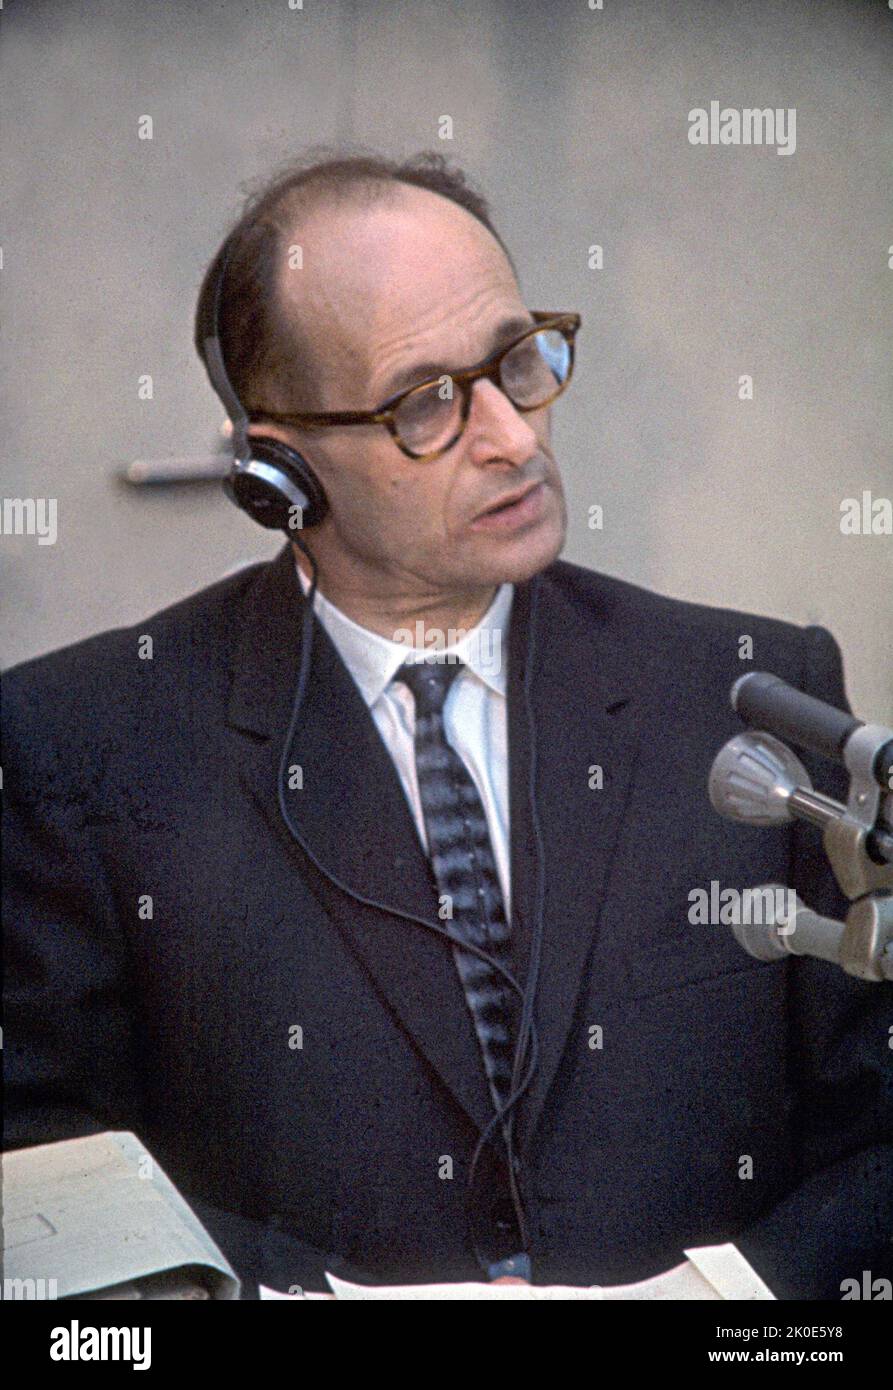 Trial of Adolf Eichmann in Israel 1962. Eichmann (1906 - 1 June 1962) was a German-Austrian SS-Obersturmbannfuhrer and one of the major organisers of the Holocaust (the "Final Solution to the Jewish Question" in Nazi terminology). Eichmann was found guilty of war crimes in a widely publicised trial in Jerusalem, where he was executed by hanging in 1962. Stock Photo